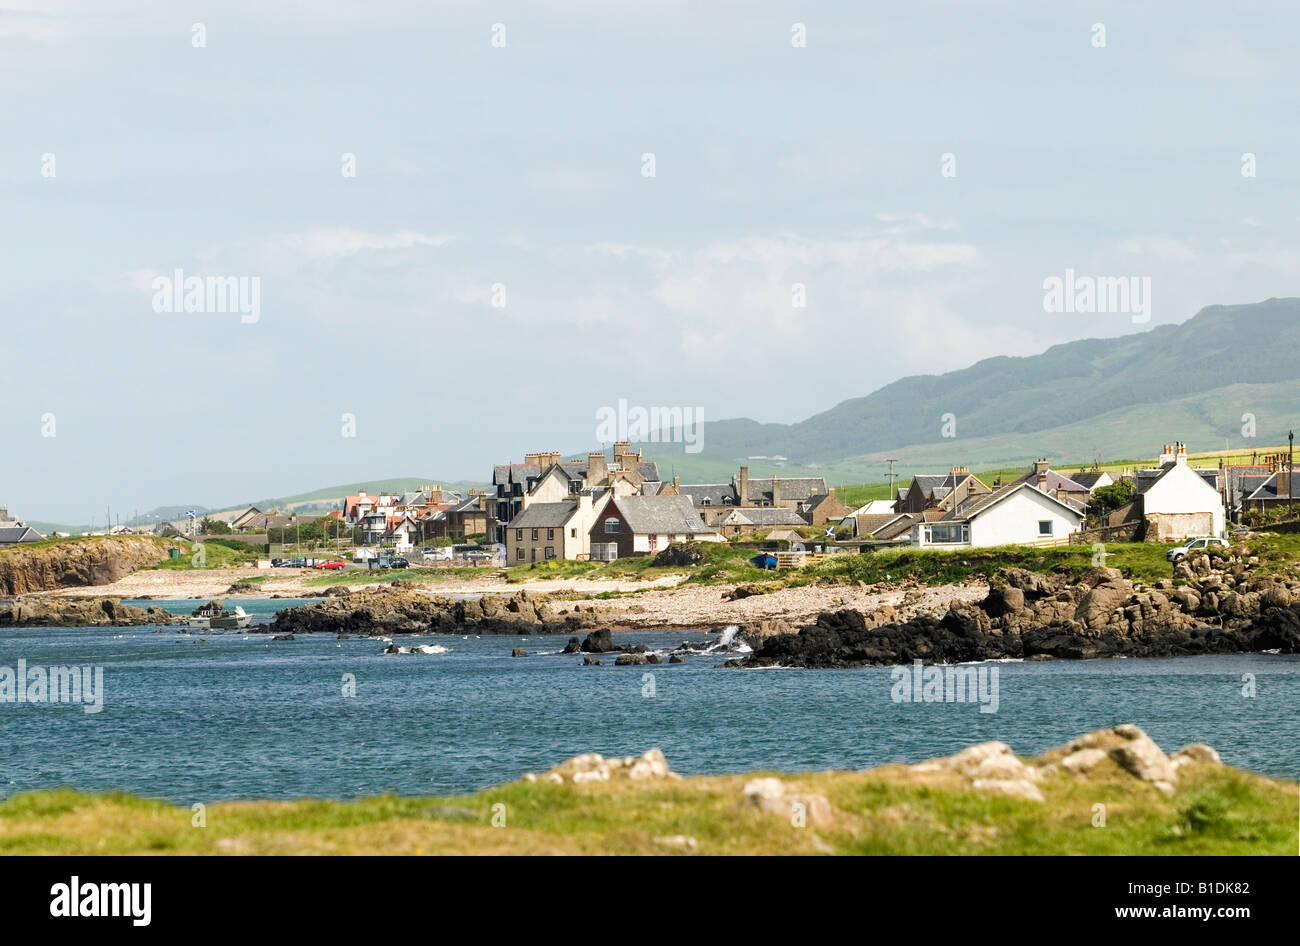 A view of the tiny coastal village of Macrahanish on the Mull of Kintyre. The village is home to a golf course and airport. Stock Photo